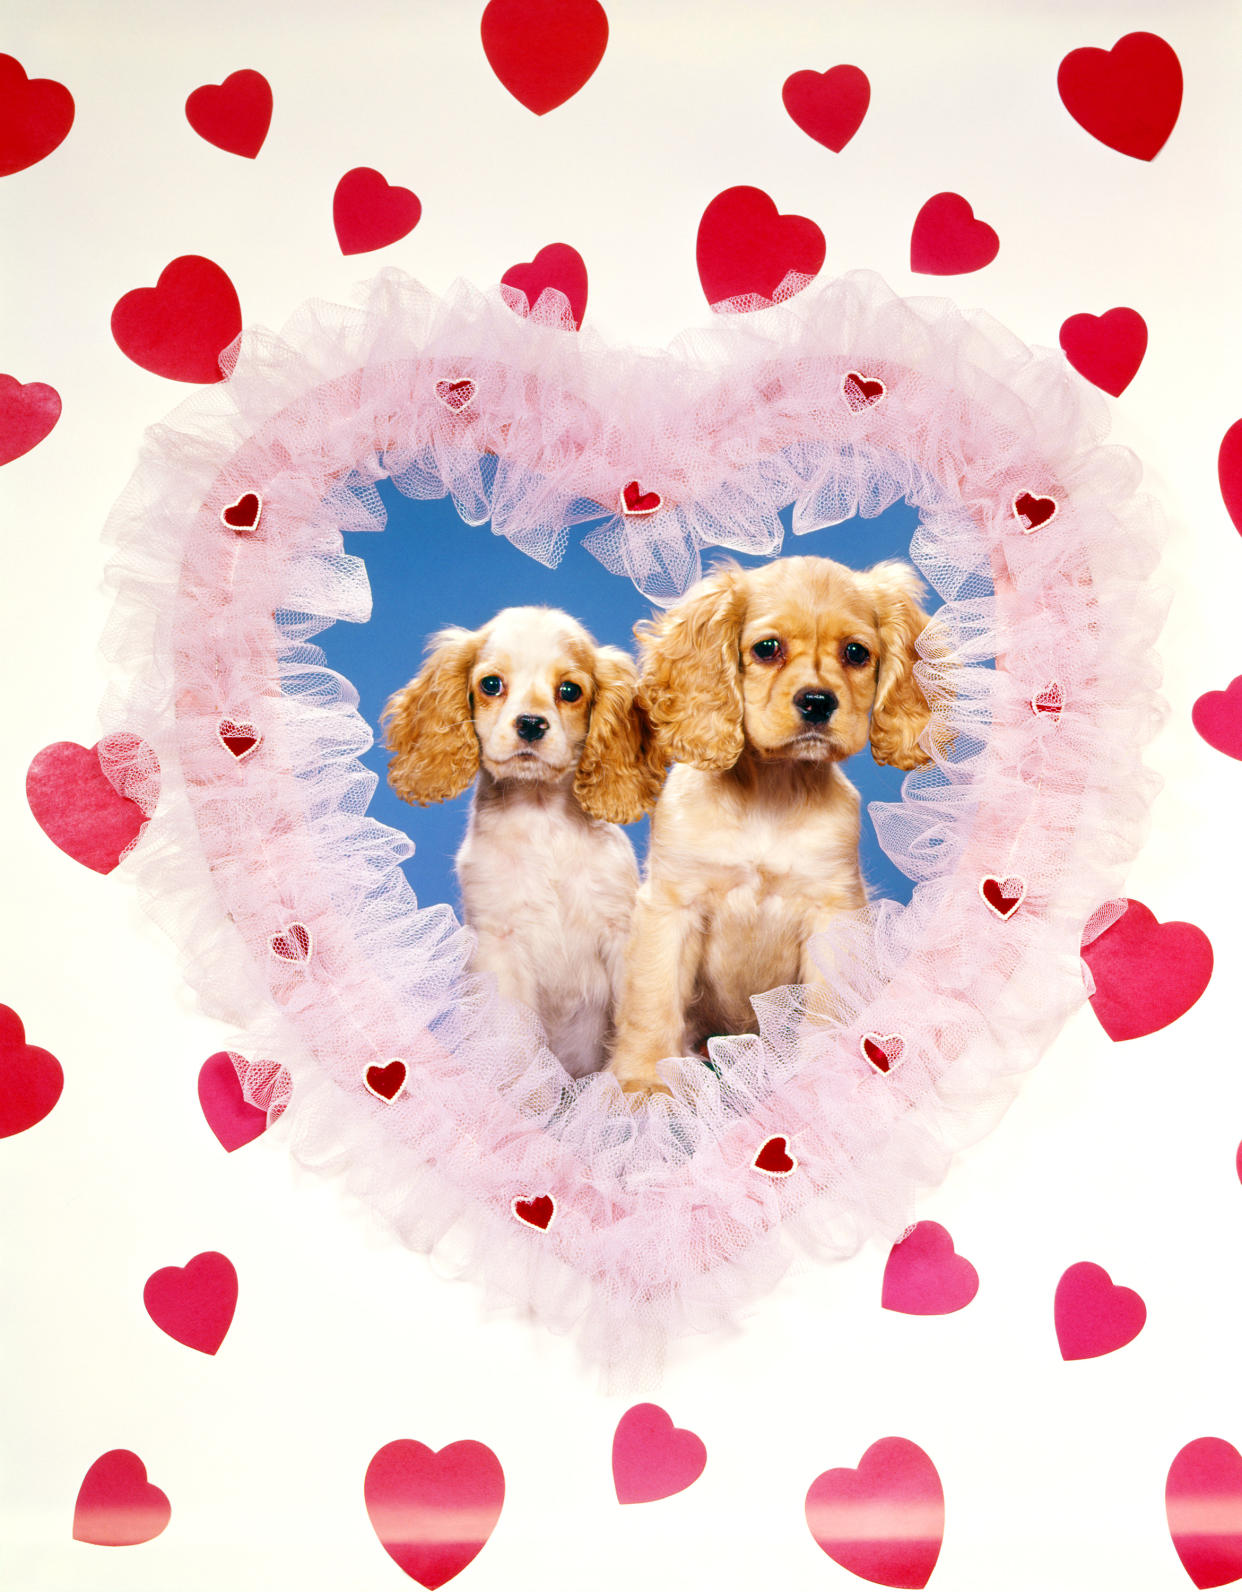 https://www.gettyimages.co.uk/detail/news-photo/cocker-spaniels-hearts-love-couple-news-photo/537859836